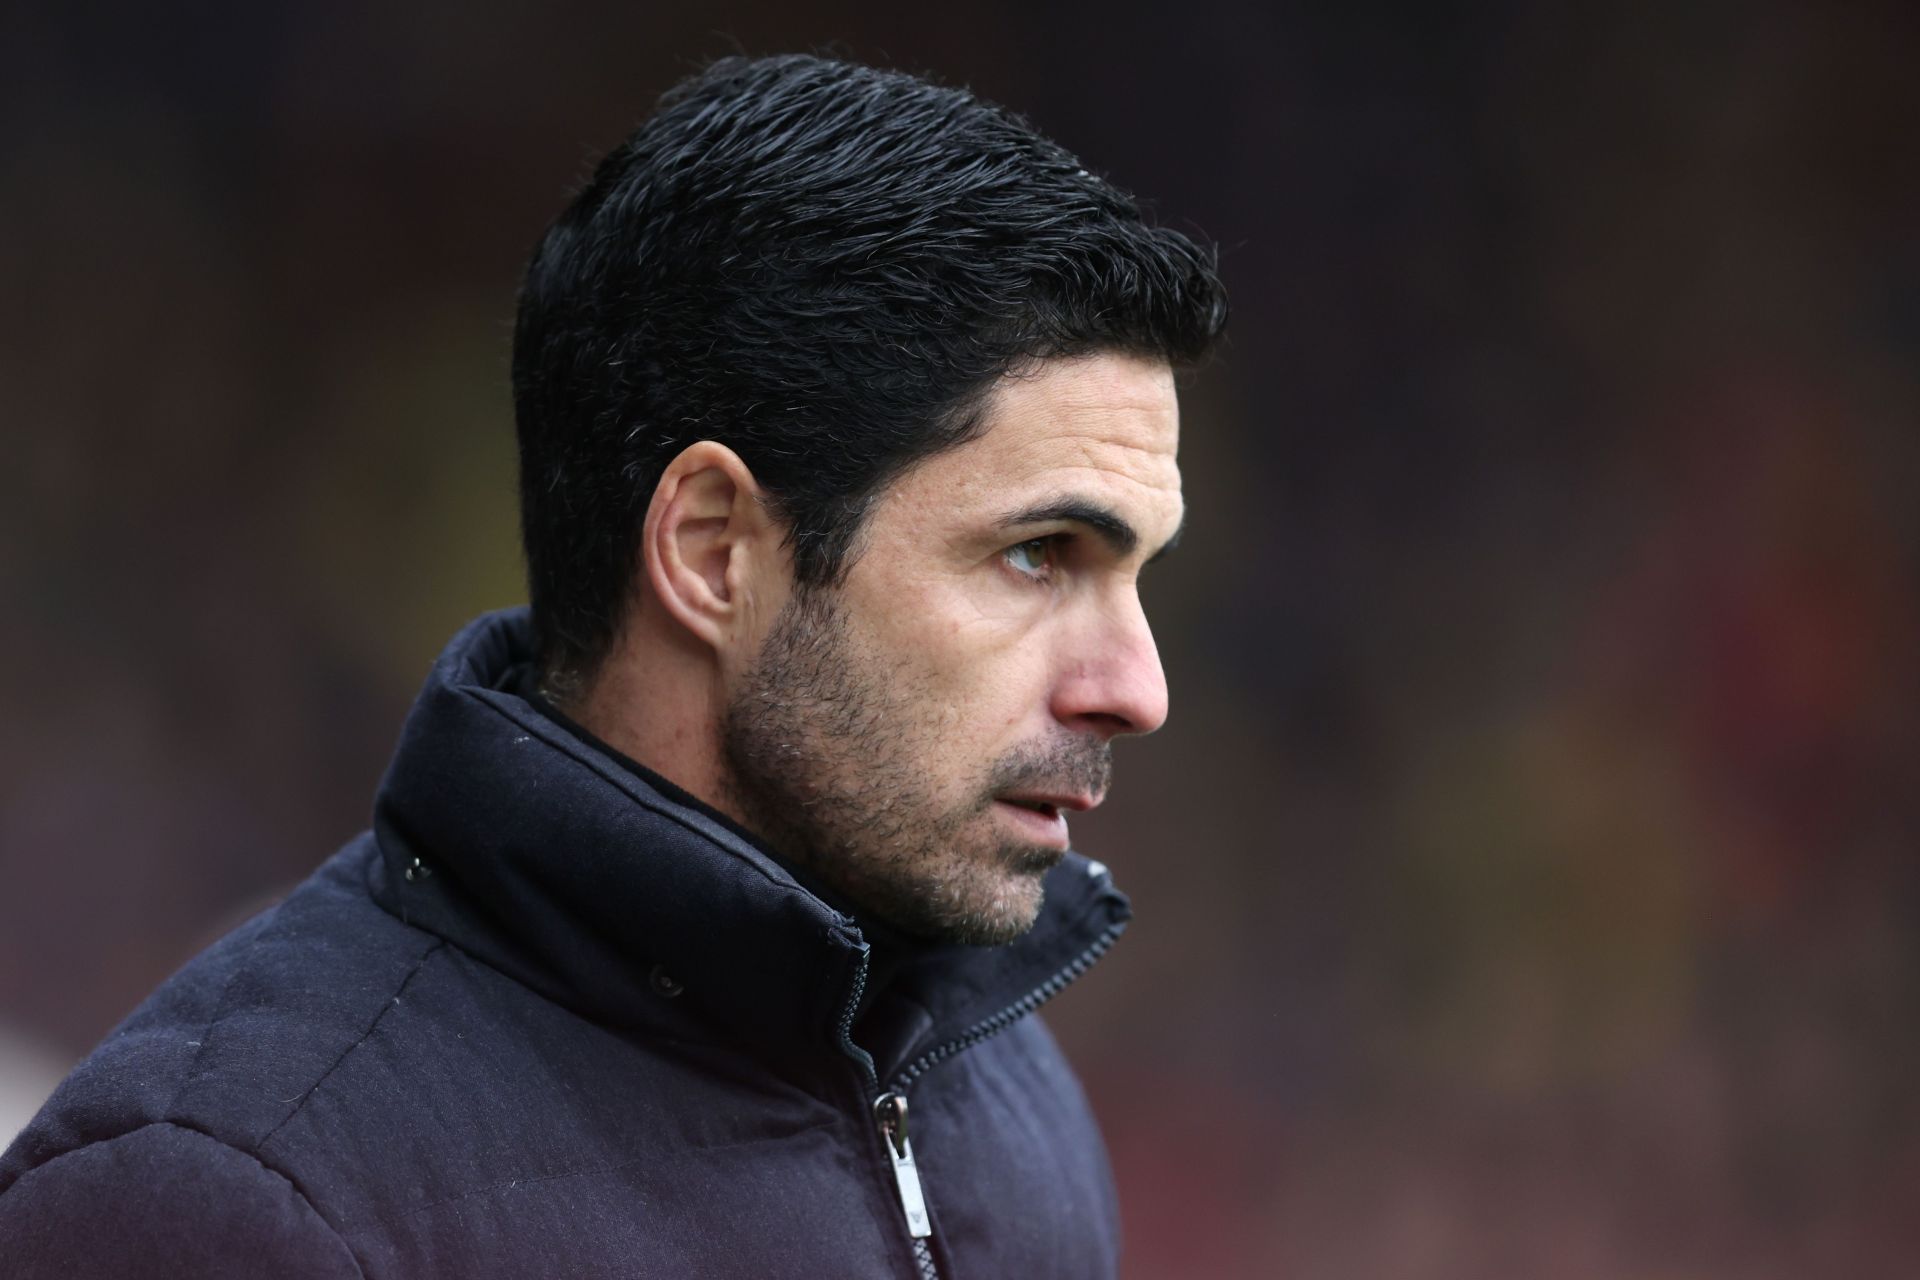 Arsenal manager Mikel Arteta has taken his team to fourth place in the Premier League.